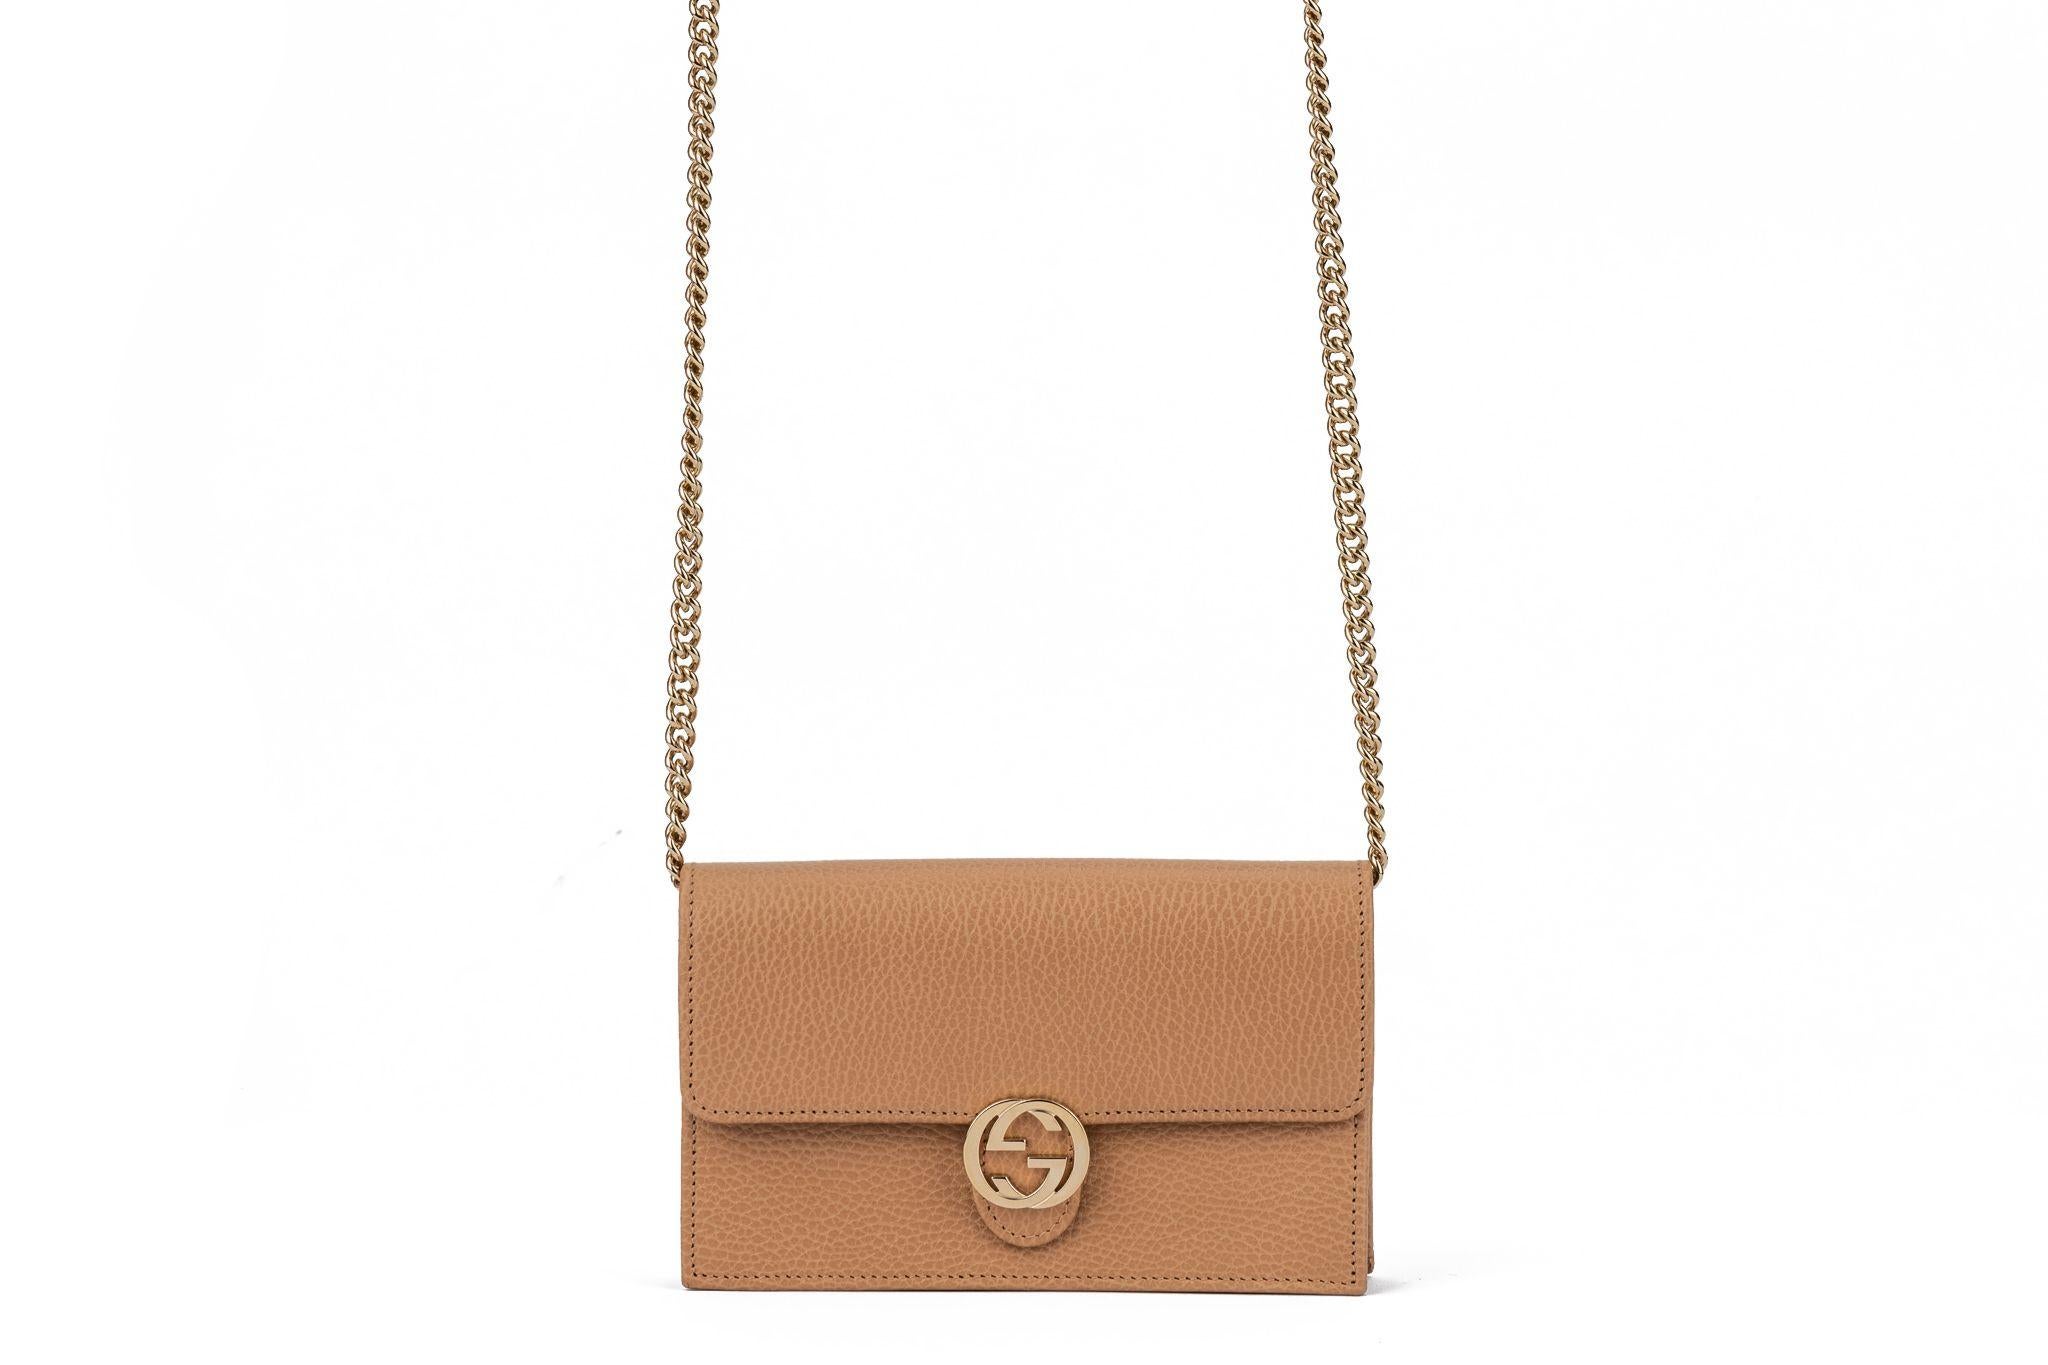 Gucci New Camel Leather Cross Body/Clutch Bag For Sale 12